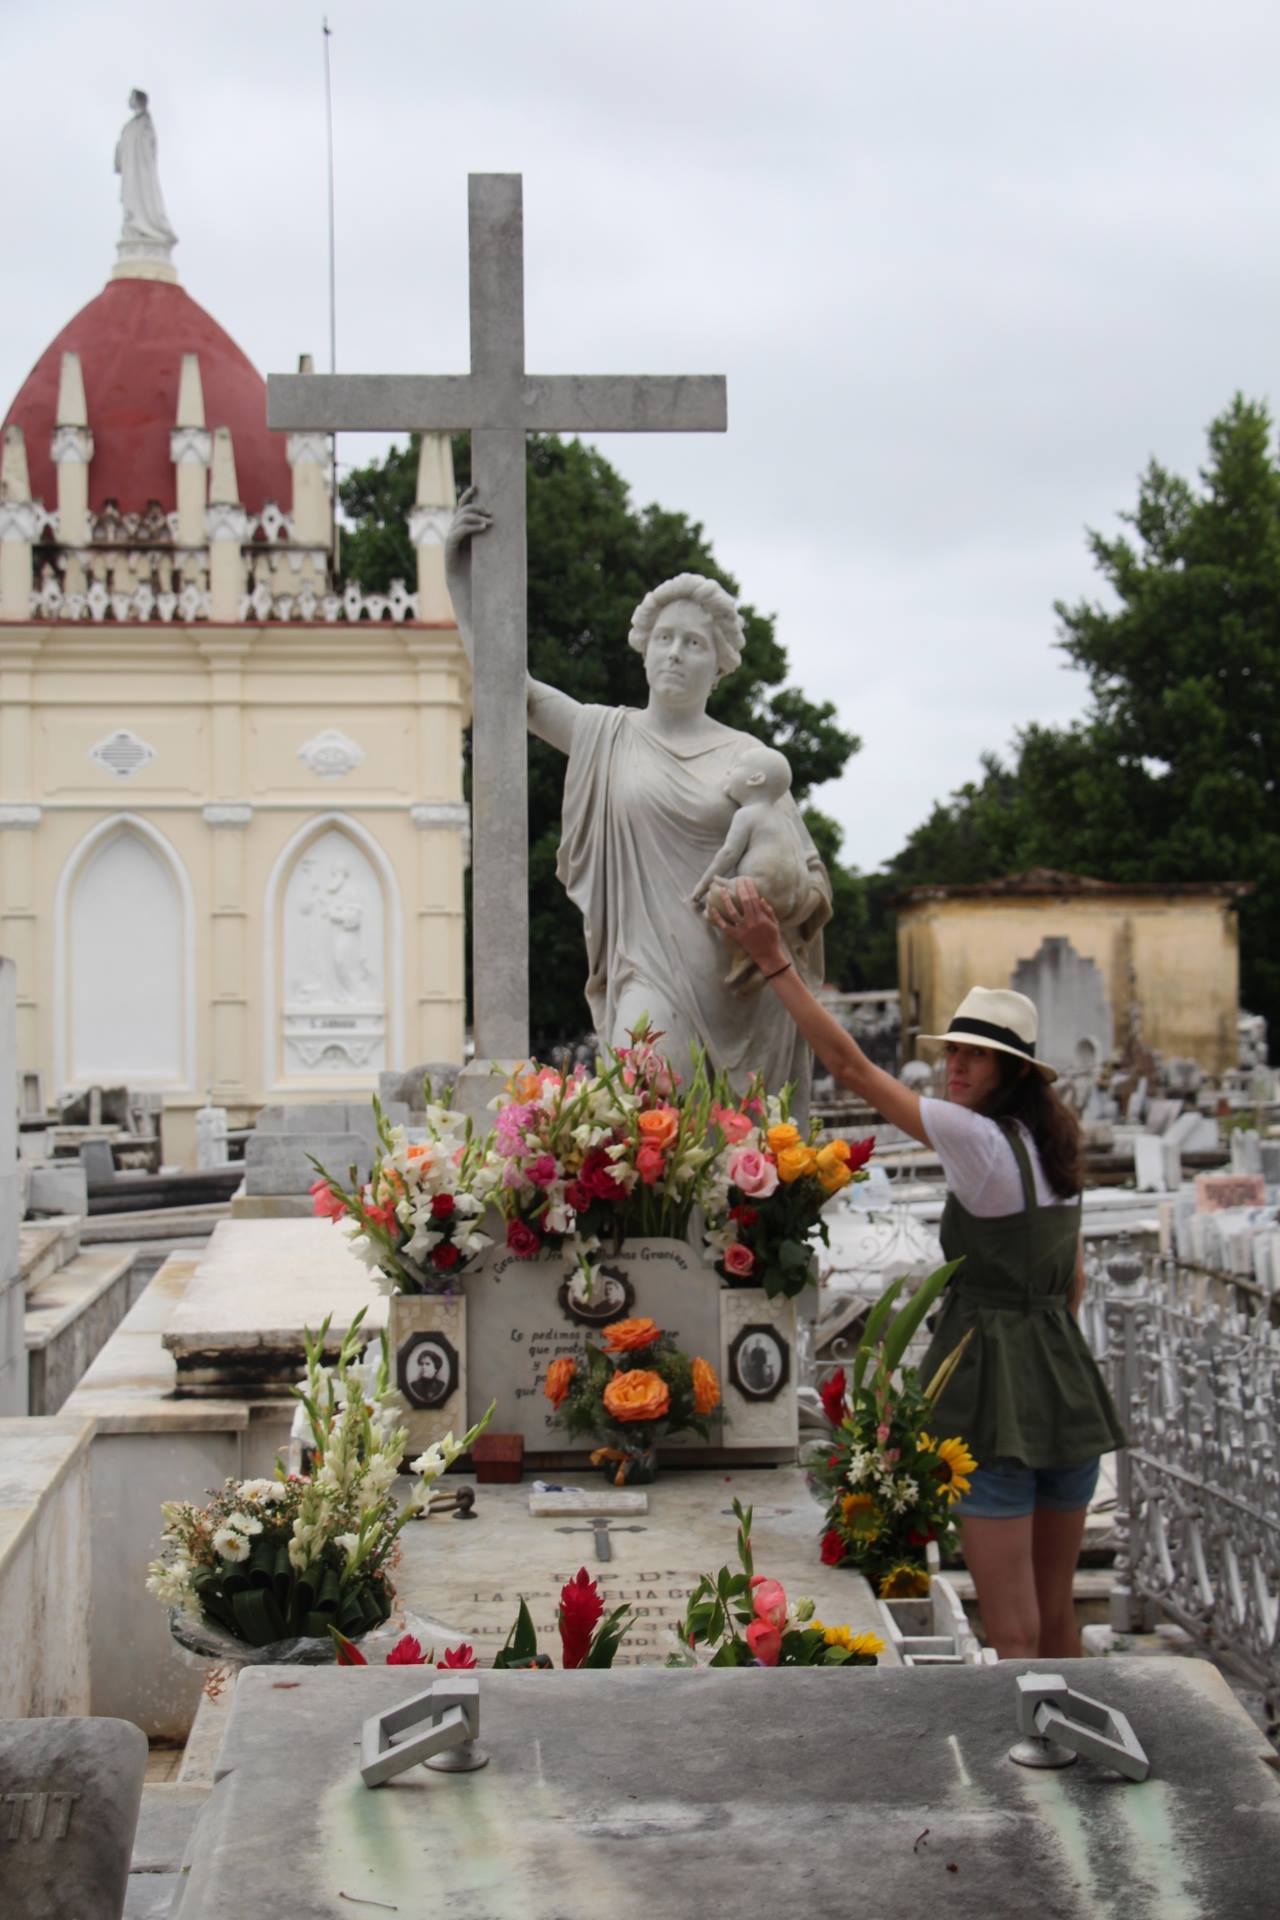   The main cemetary in Havana is very much worth a visit. Here Emily leaves a wish based on a local legend.  